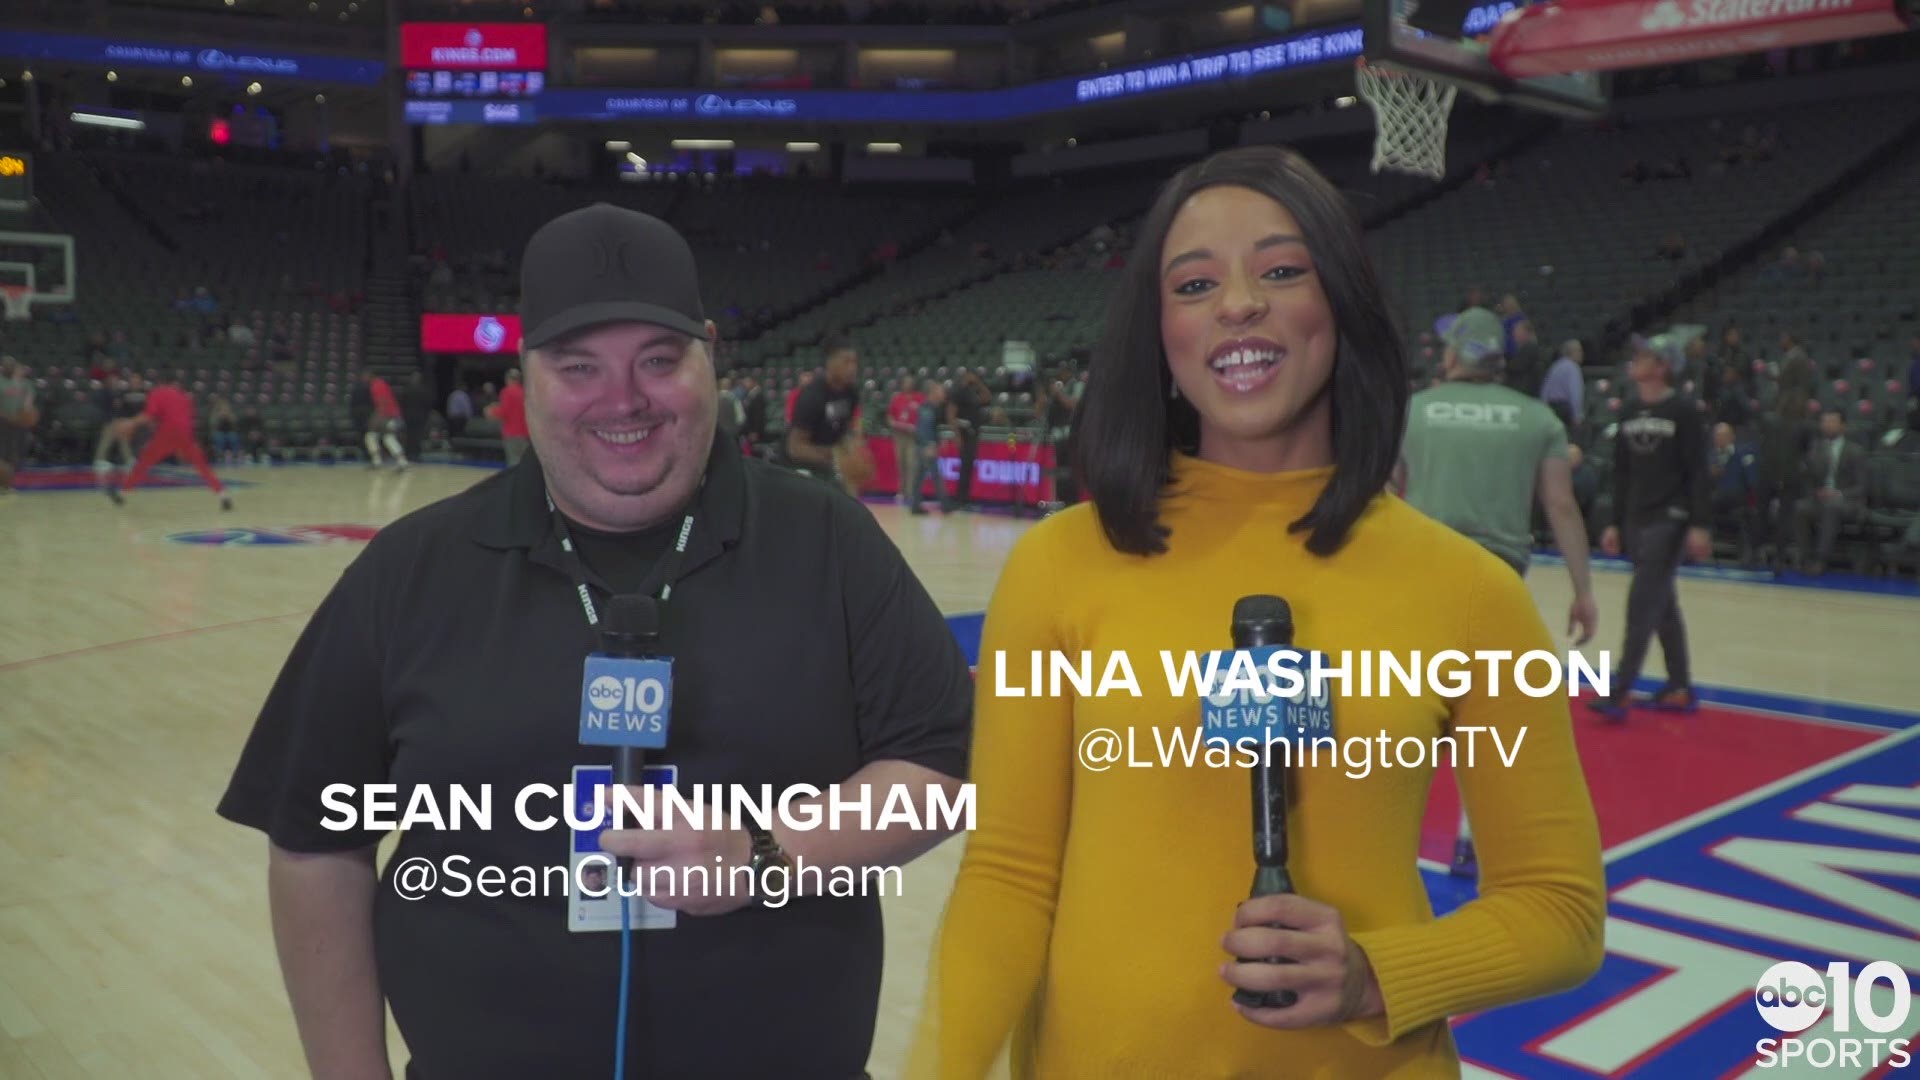 ABC10's Lina Washington and Sean Cunningham check in from the royal blue court at Golden 1 Center to provide insight on Sacramento Kings basketball.